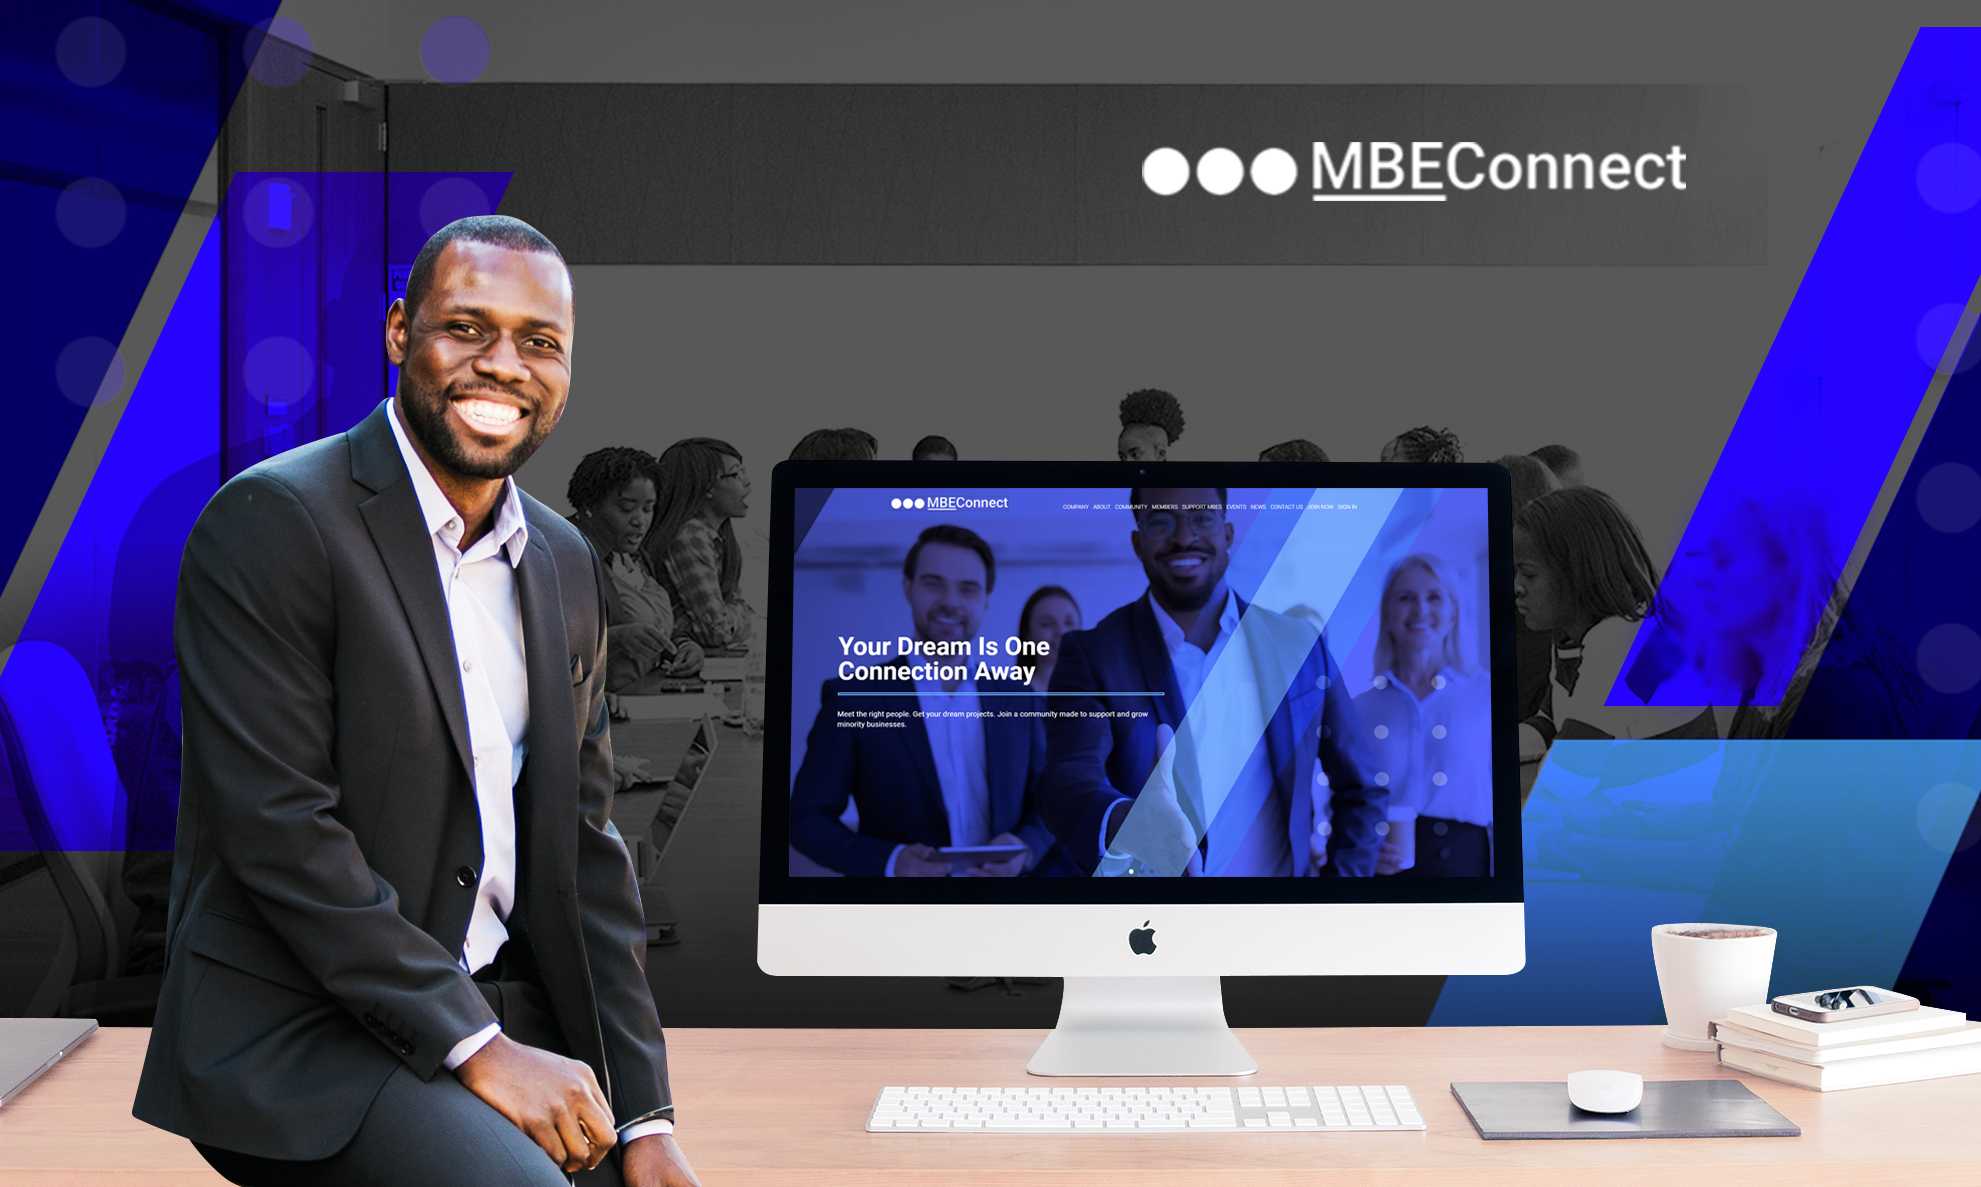 MBEConnect